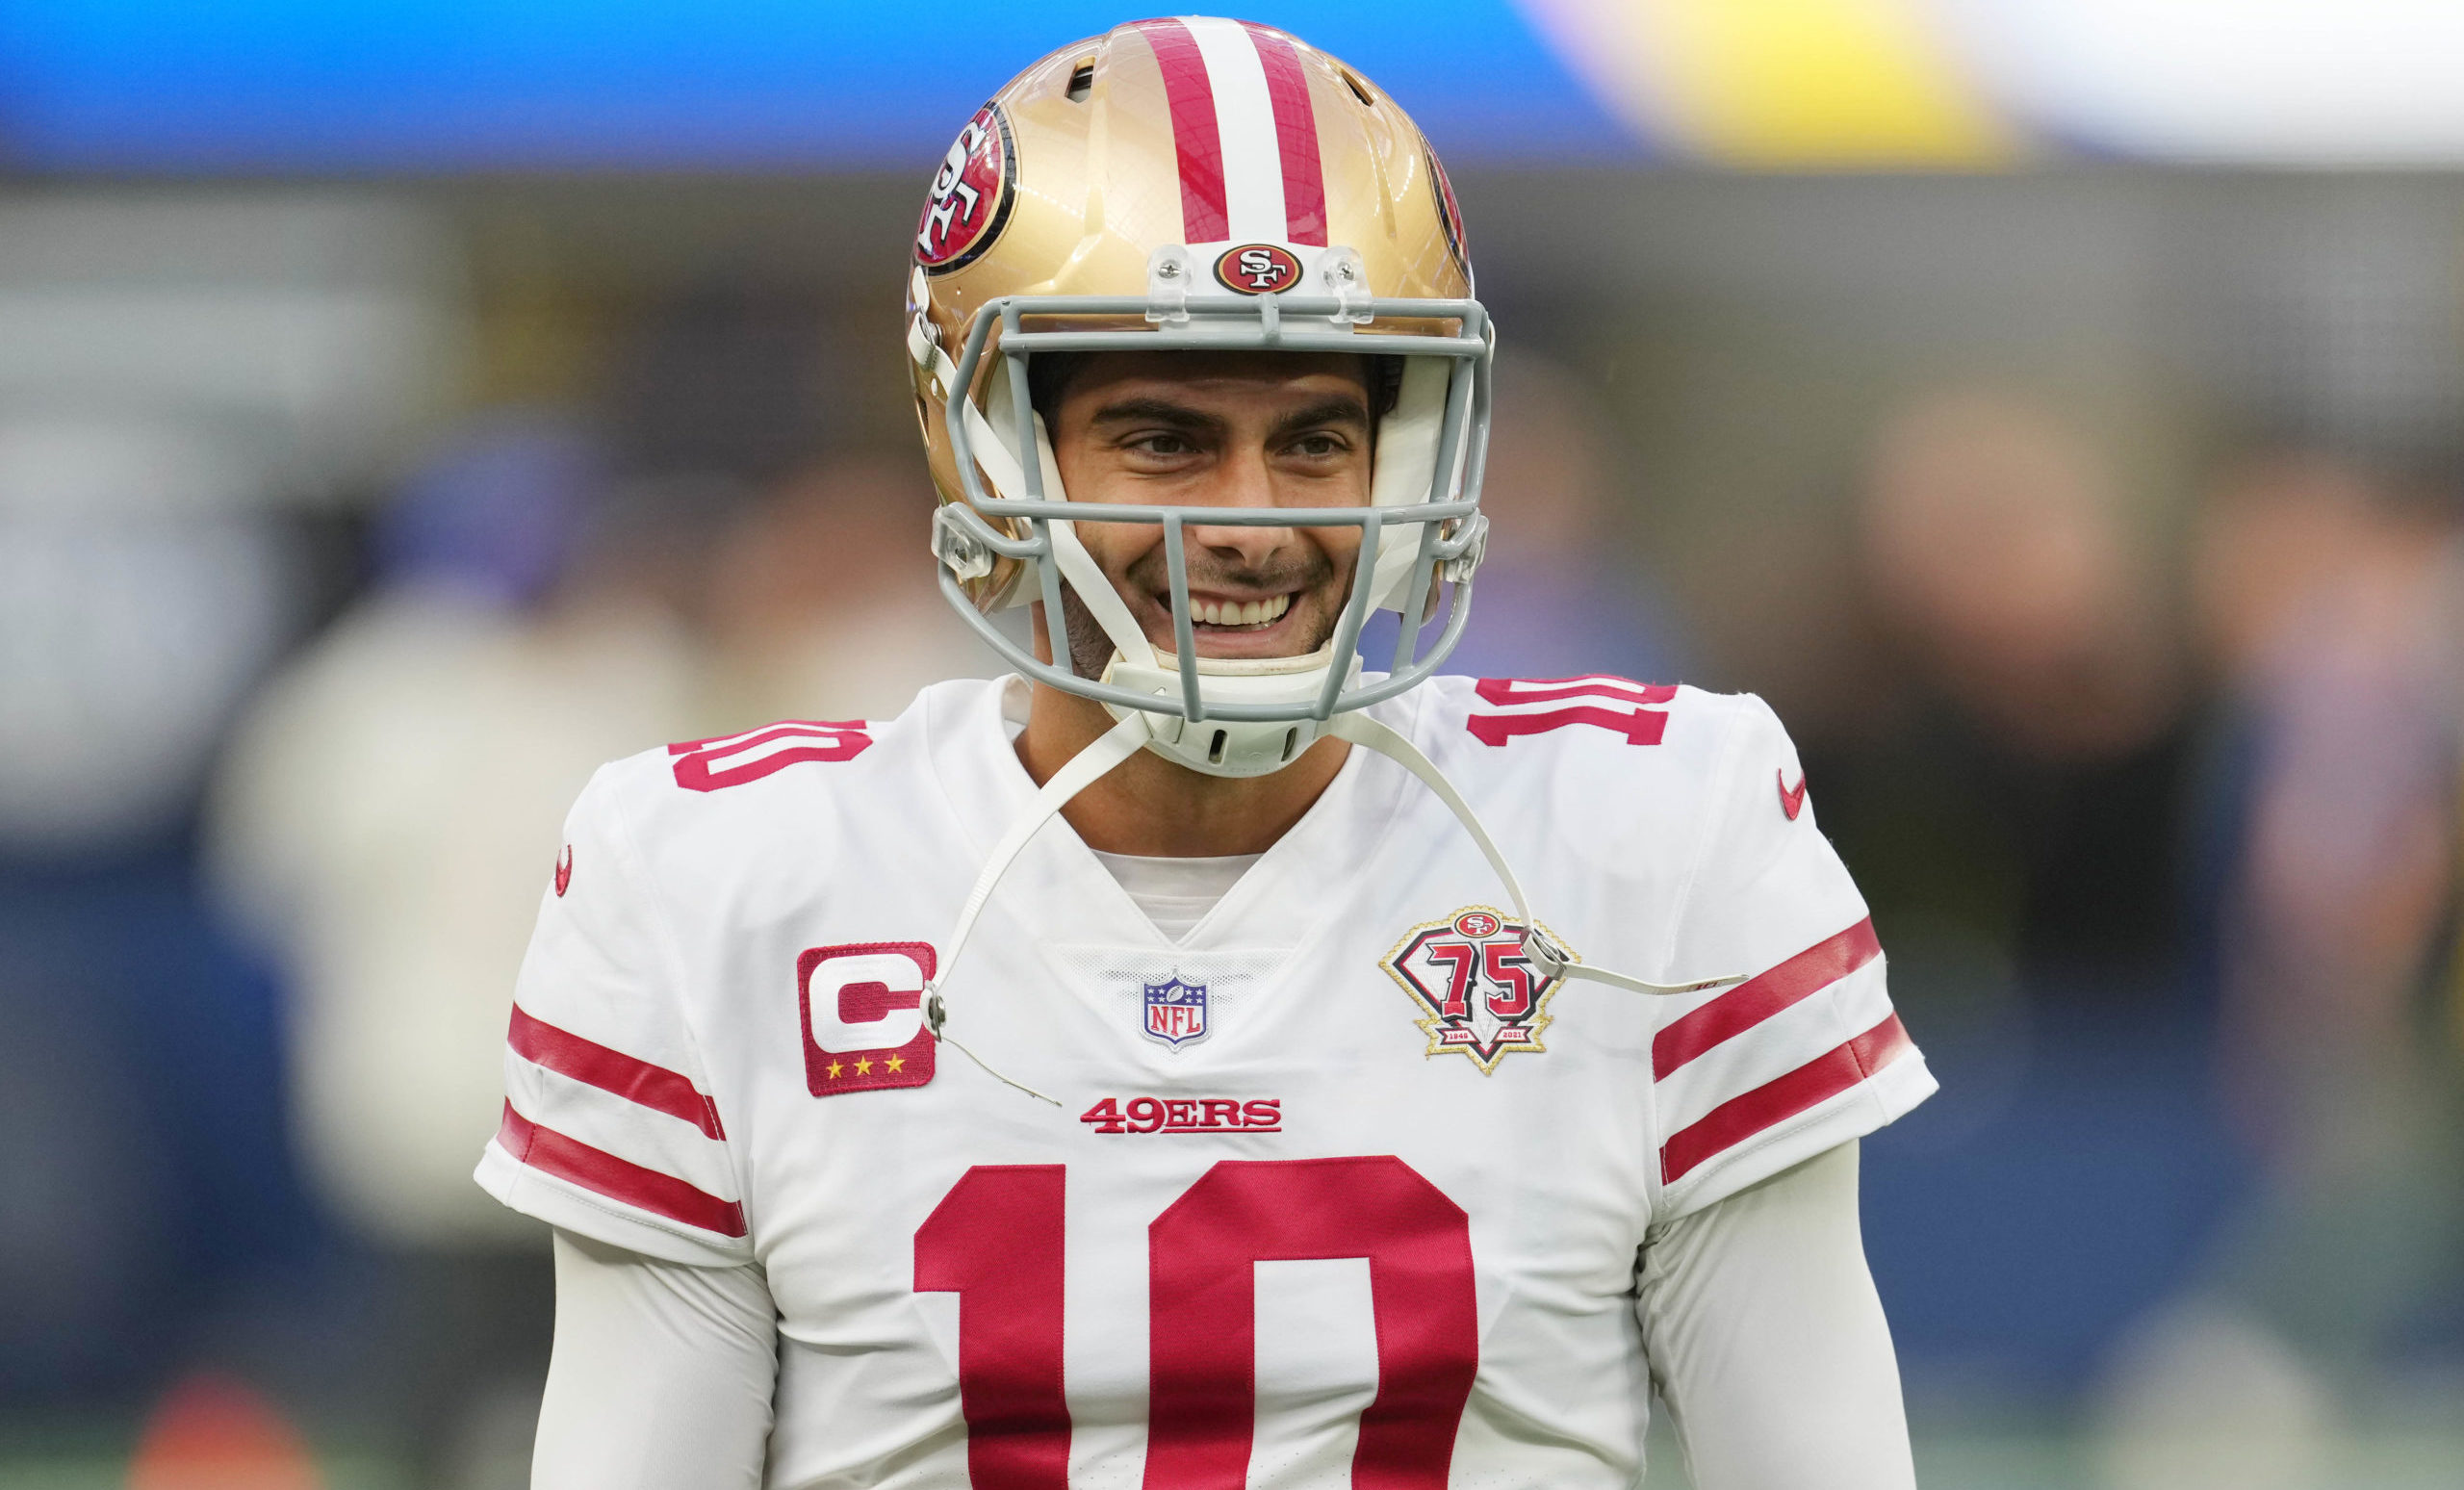 Why Would Jimmy Garoppolo Want to Stay in San Francisco?